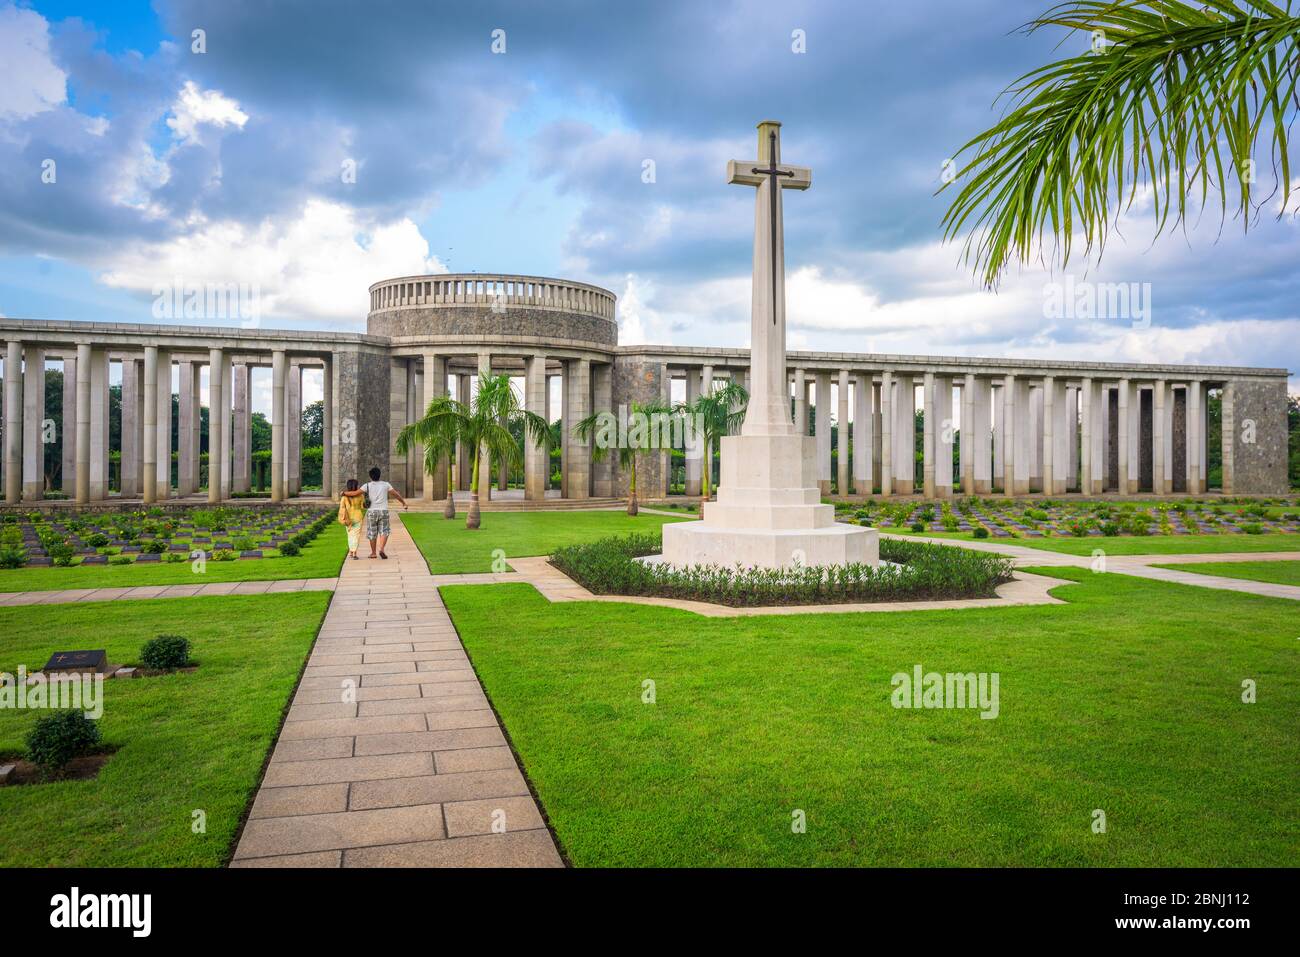 Taukkyan War Cemetery dedicated to allied losses during WWII near Yangon, Myanmar. Stock Photo